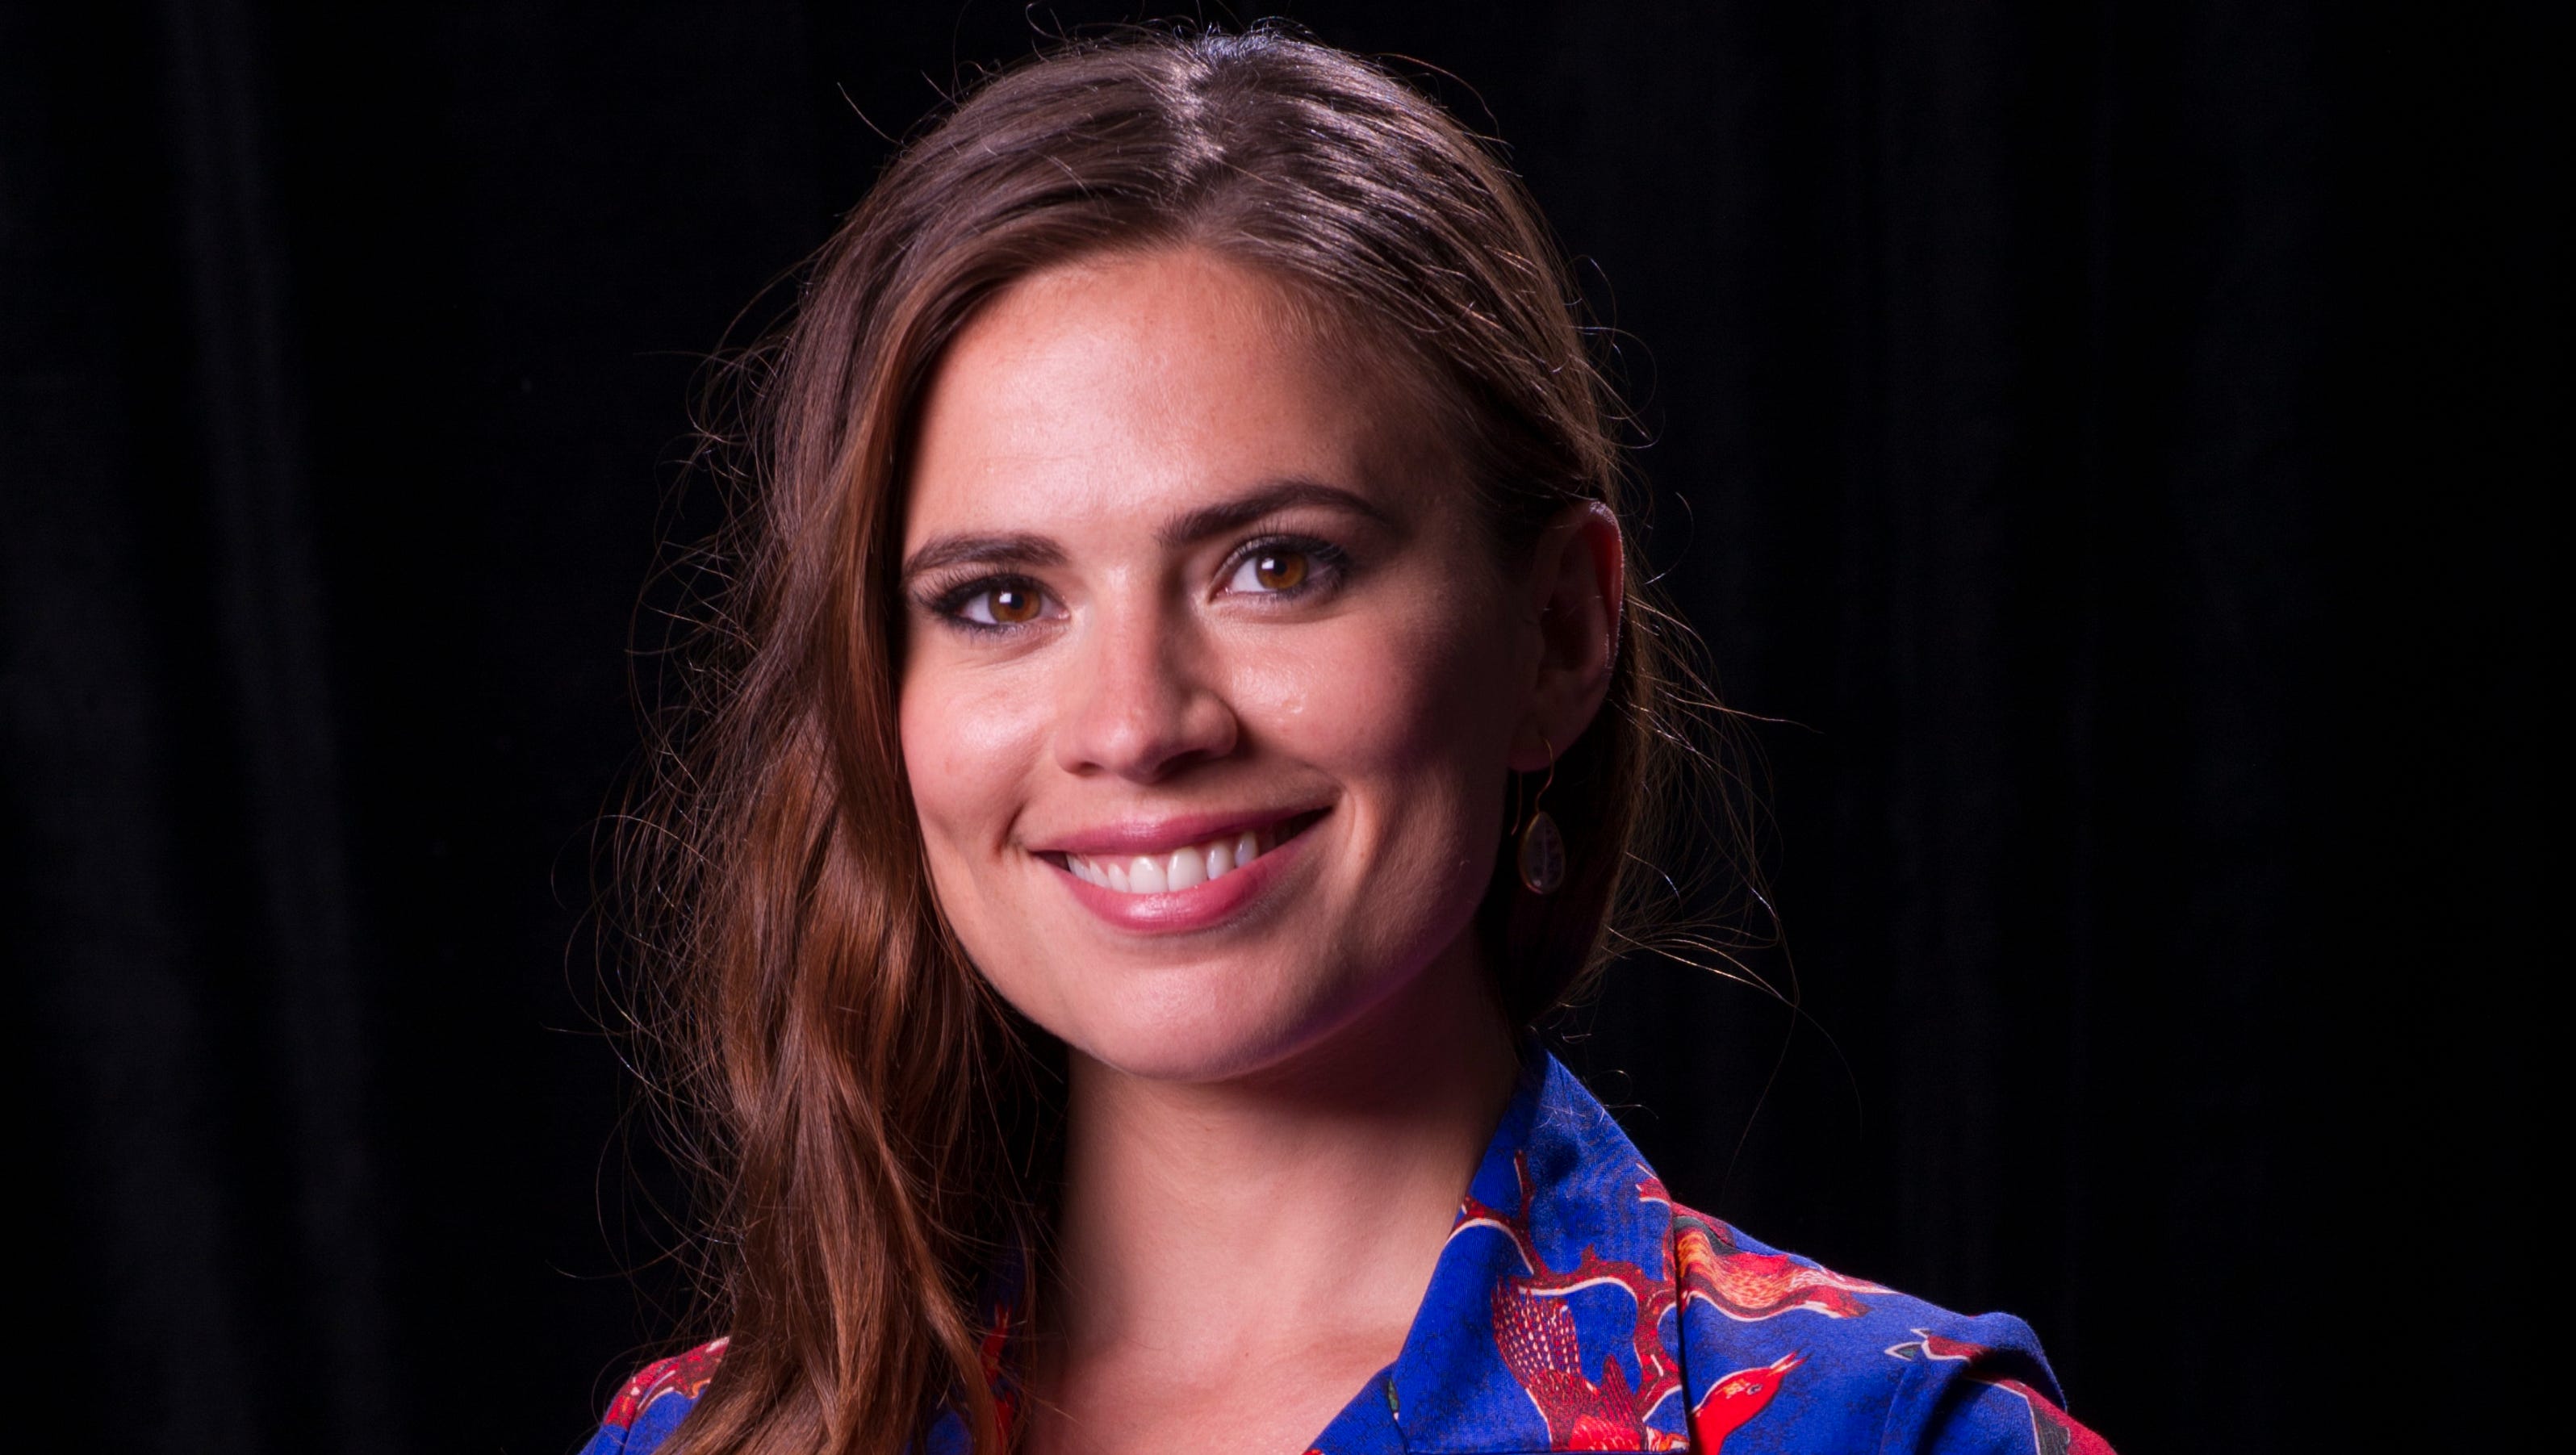 Hayley Atwell's 'Agent Carter' defies stereotypes